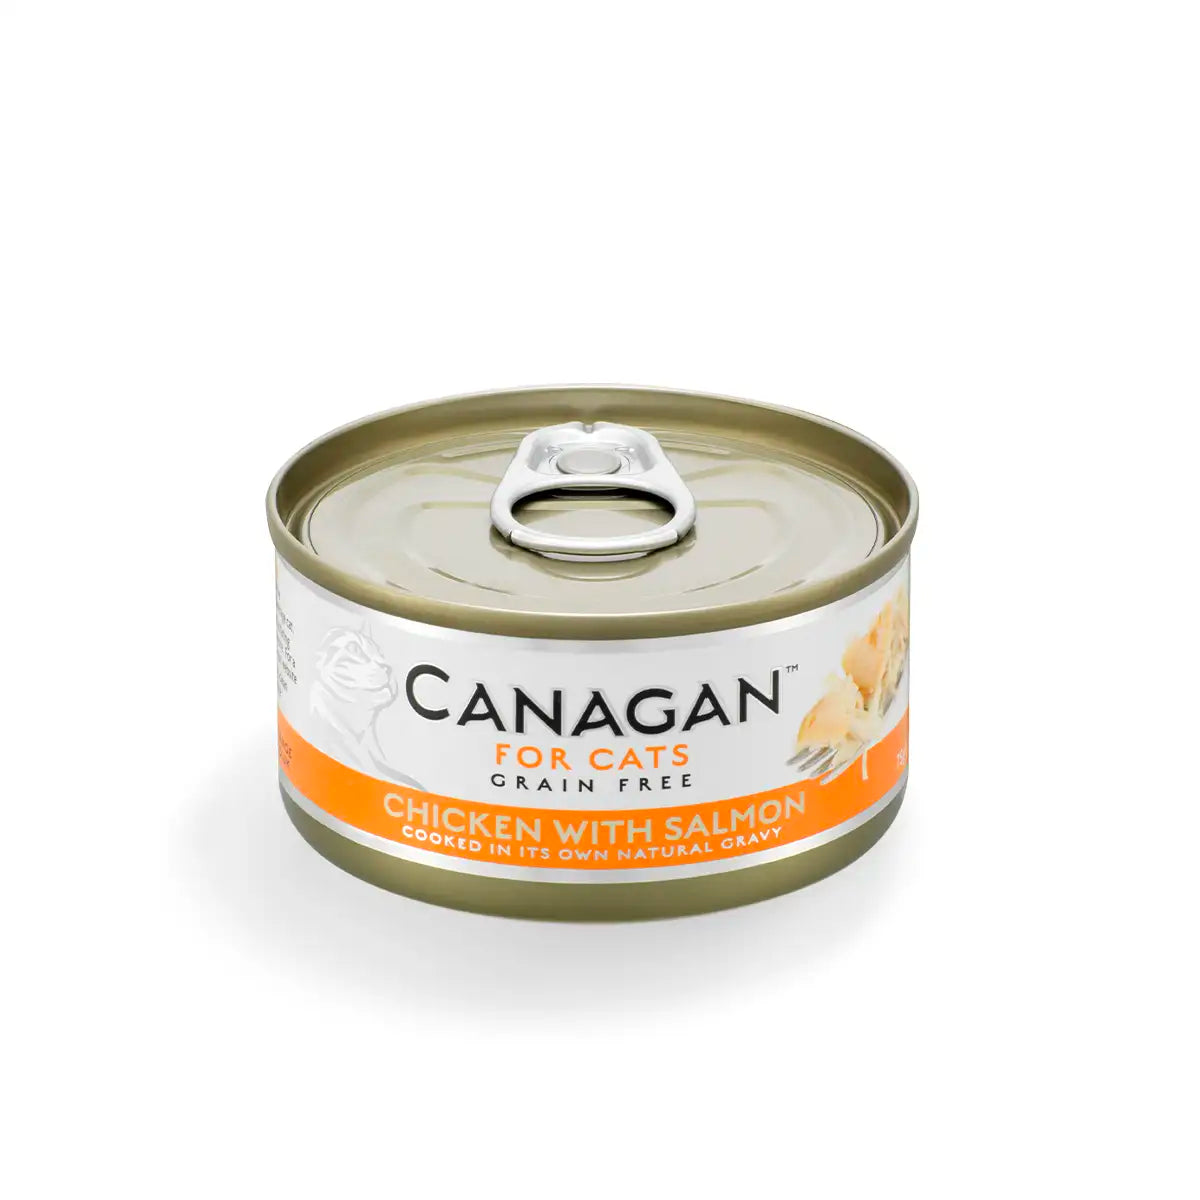 Canagan Cat Canned Food Chicken With Salmon 75g Regular price